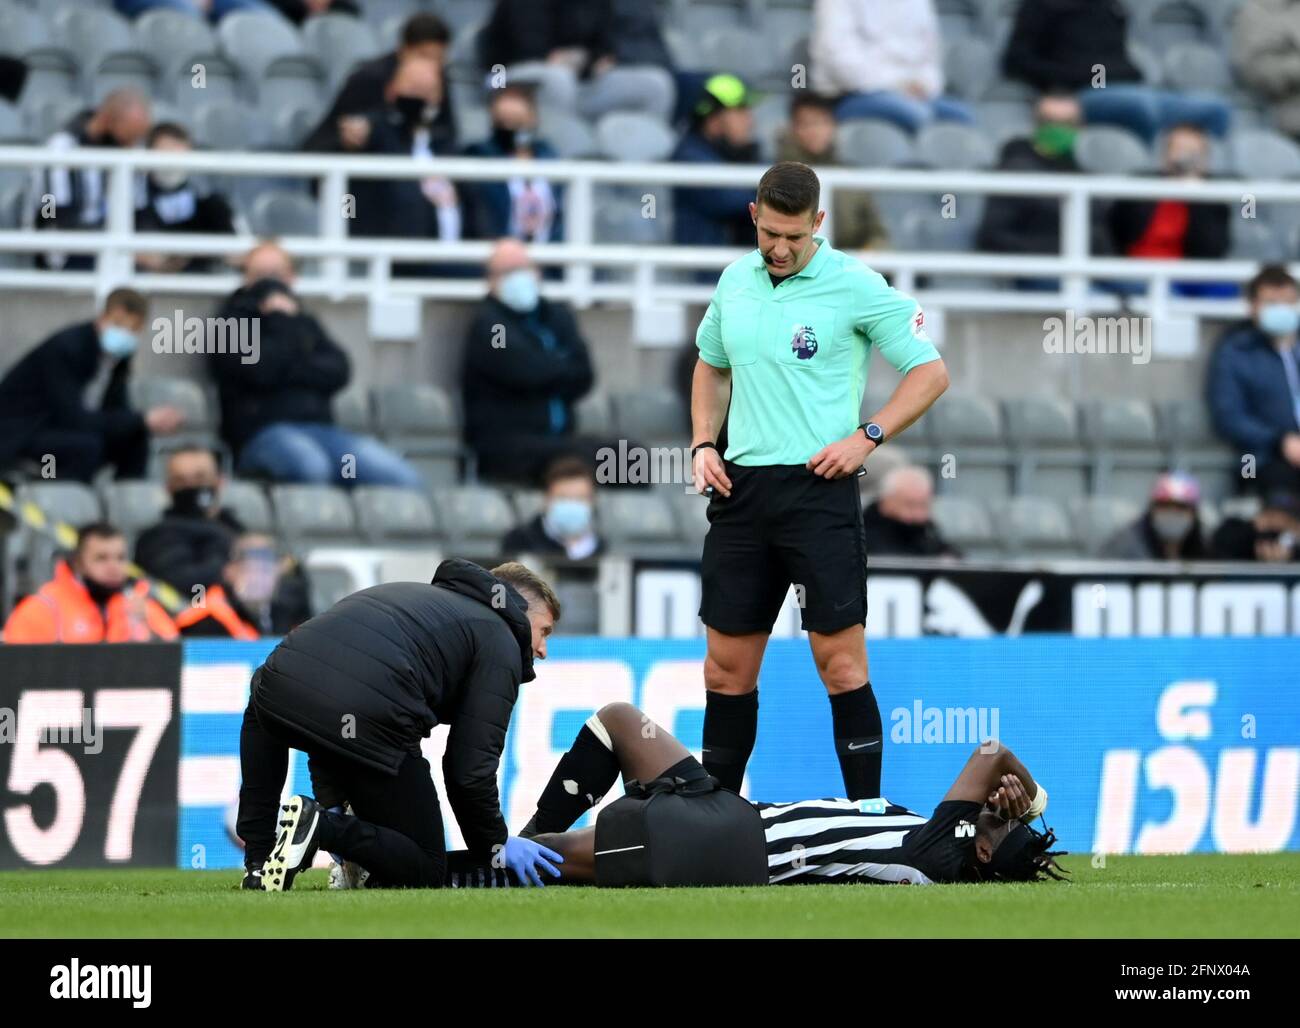 Newcastle United's Allan Saint-Maximin receives medical attention during the Premier League match at St. James' Park, Newcastle upon Tyne. Picture date: Wednesday May 19, 2021. Stock Photo